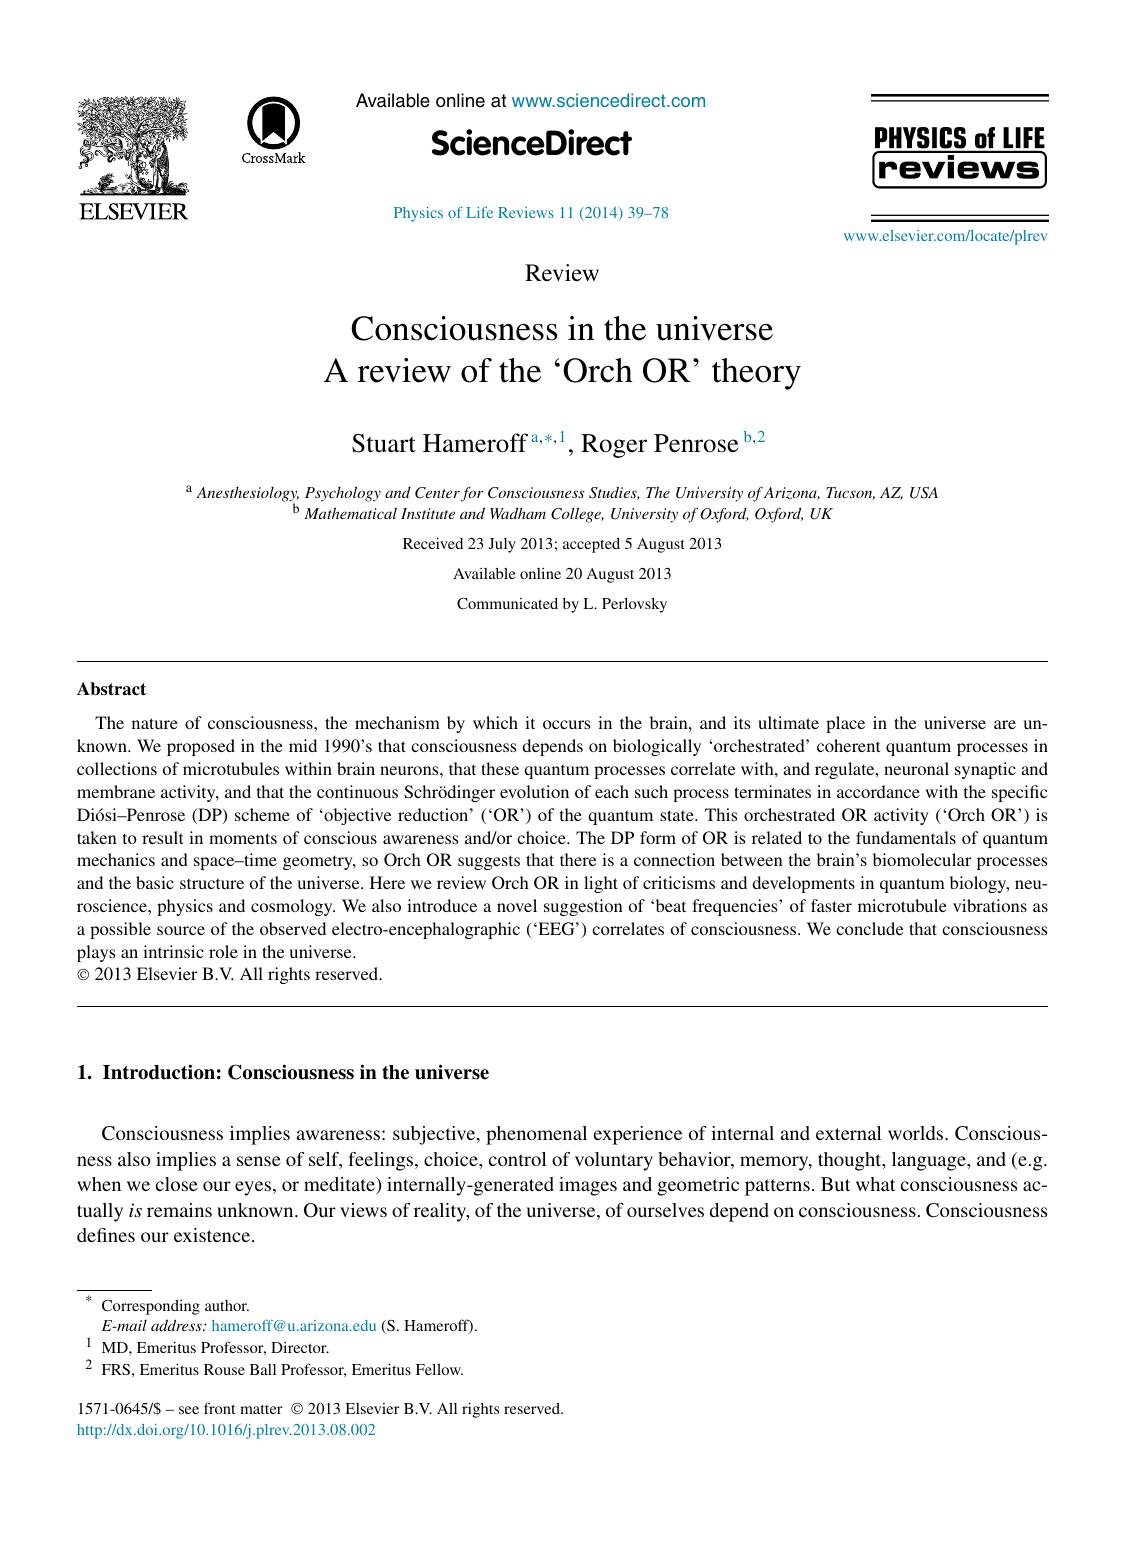 Consciousness in the universe.A review of the ‘Orch OR’ theory - Paper